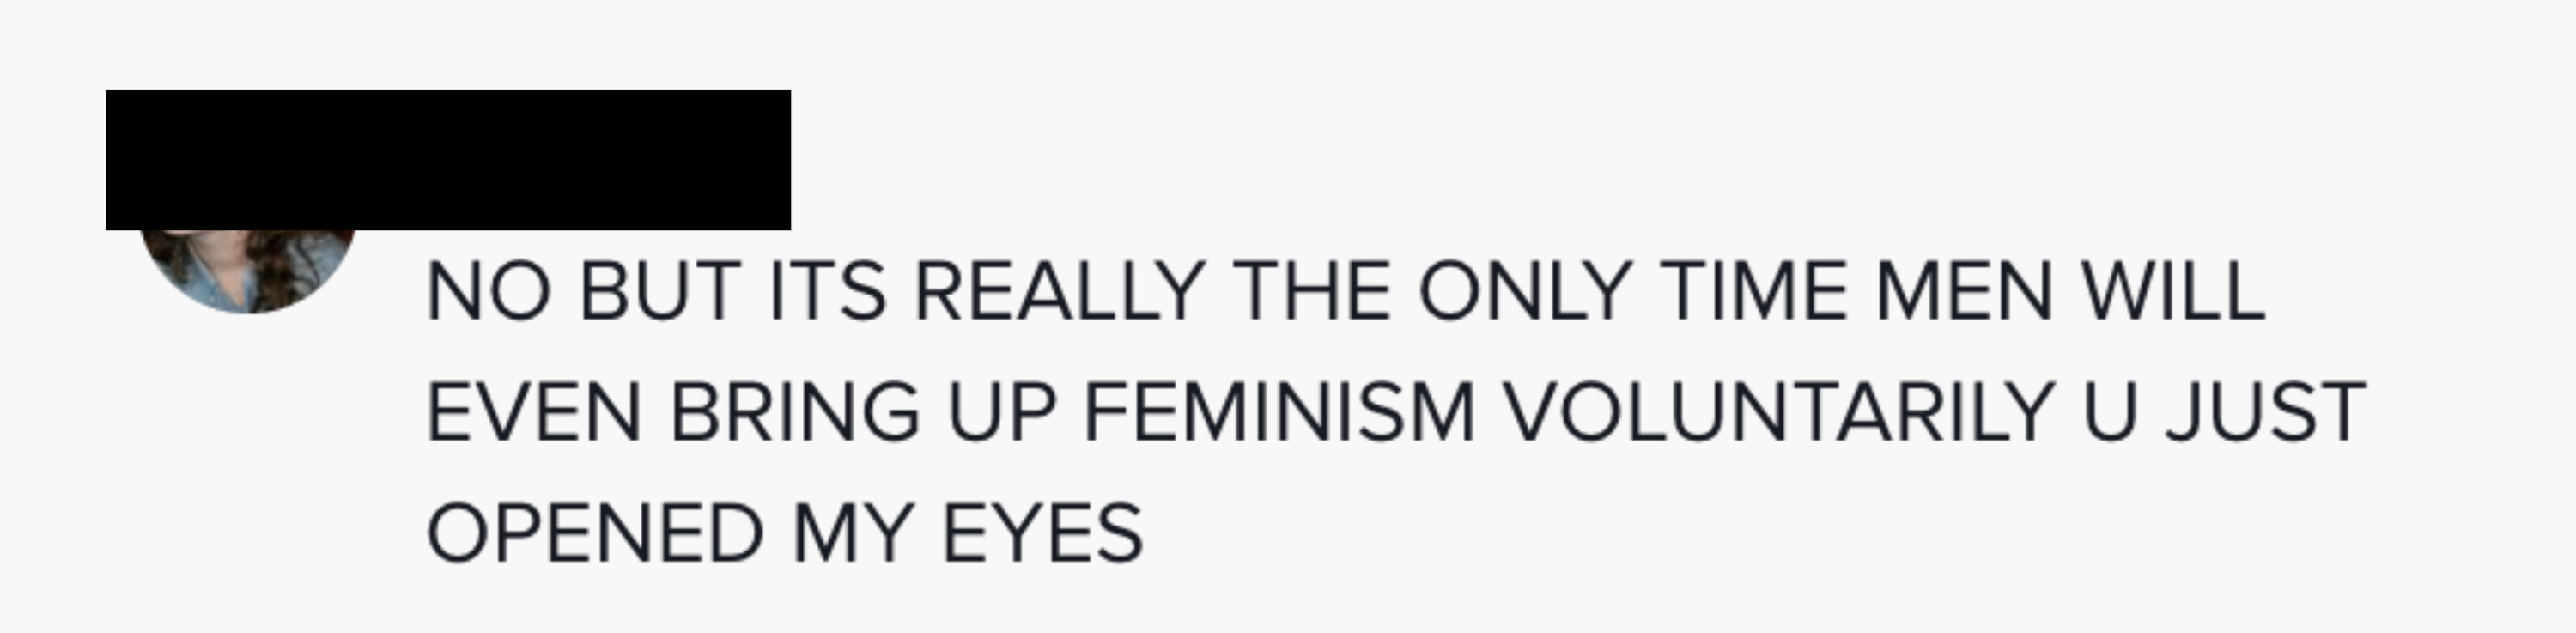 NO BUT ITS REALLY THE ONLY TIME MEN WILL EVEN BRING UP FEMINISM VOLUNTARILY U JUST OPENED MY EYES